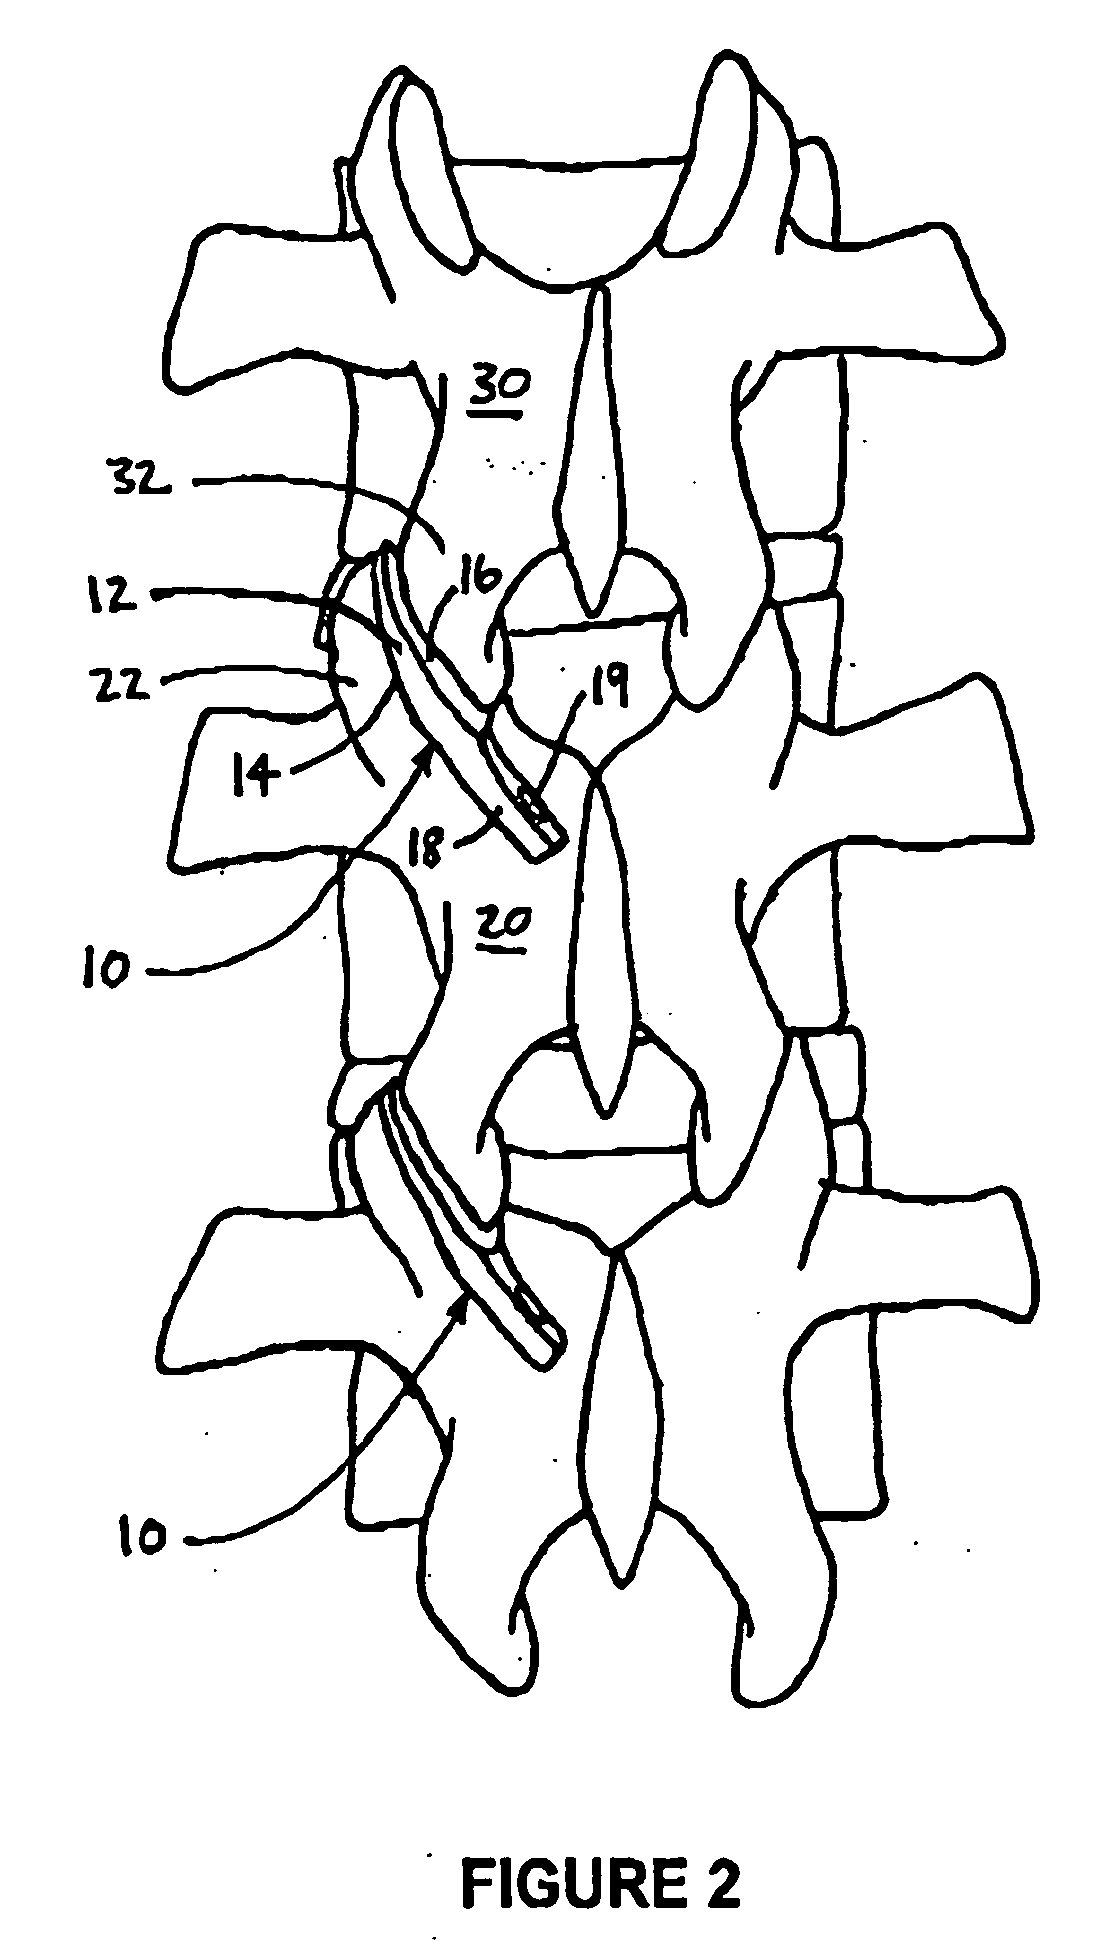 Method and device for treating ailments of the spine